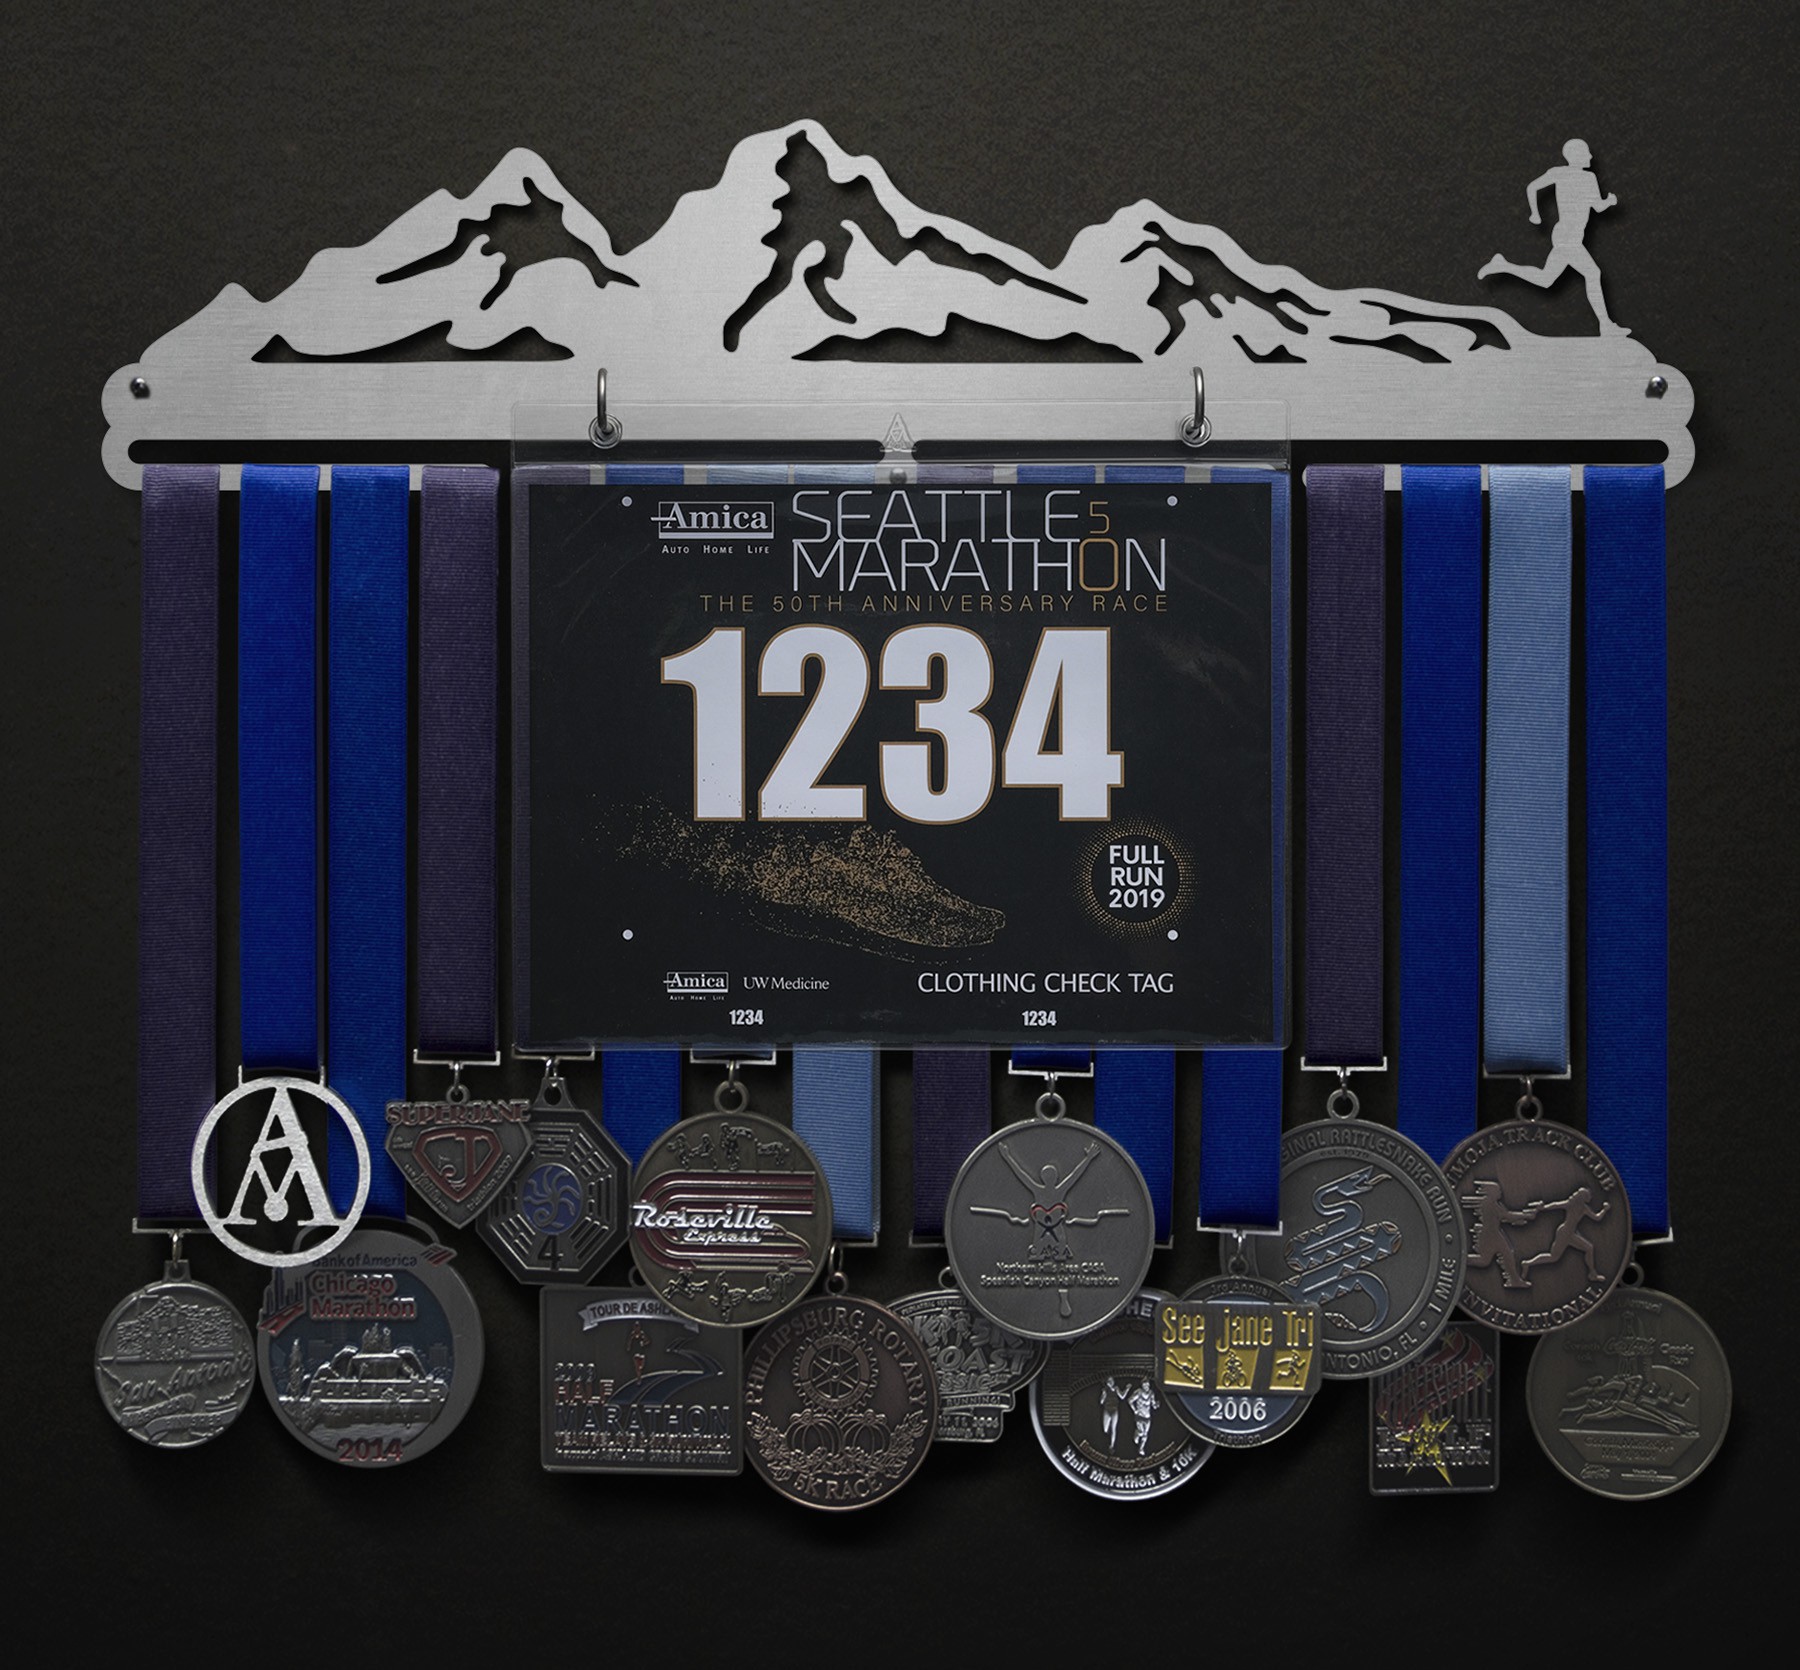 Mountainscape - Male - Original Version Bib and Medal Display